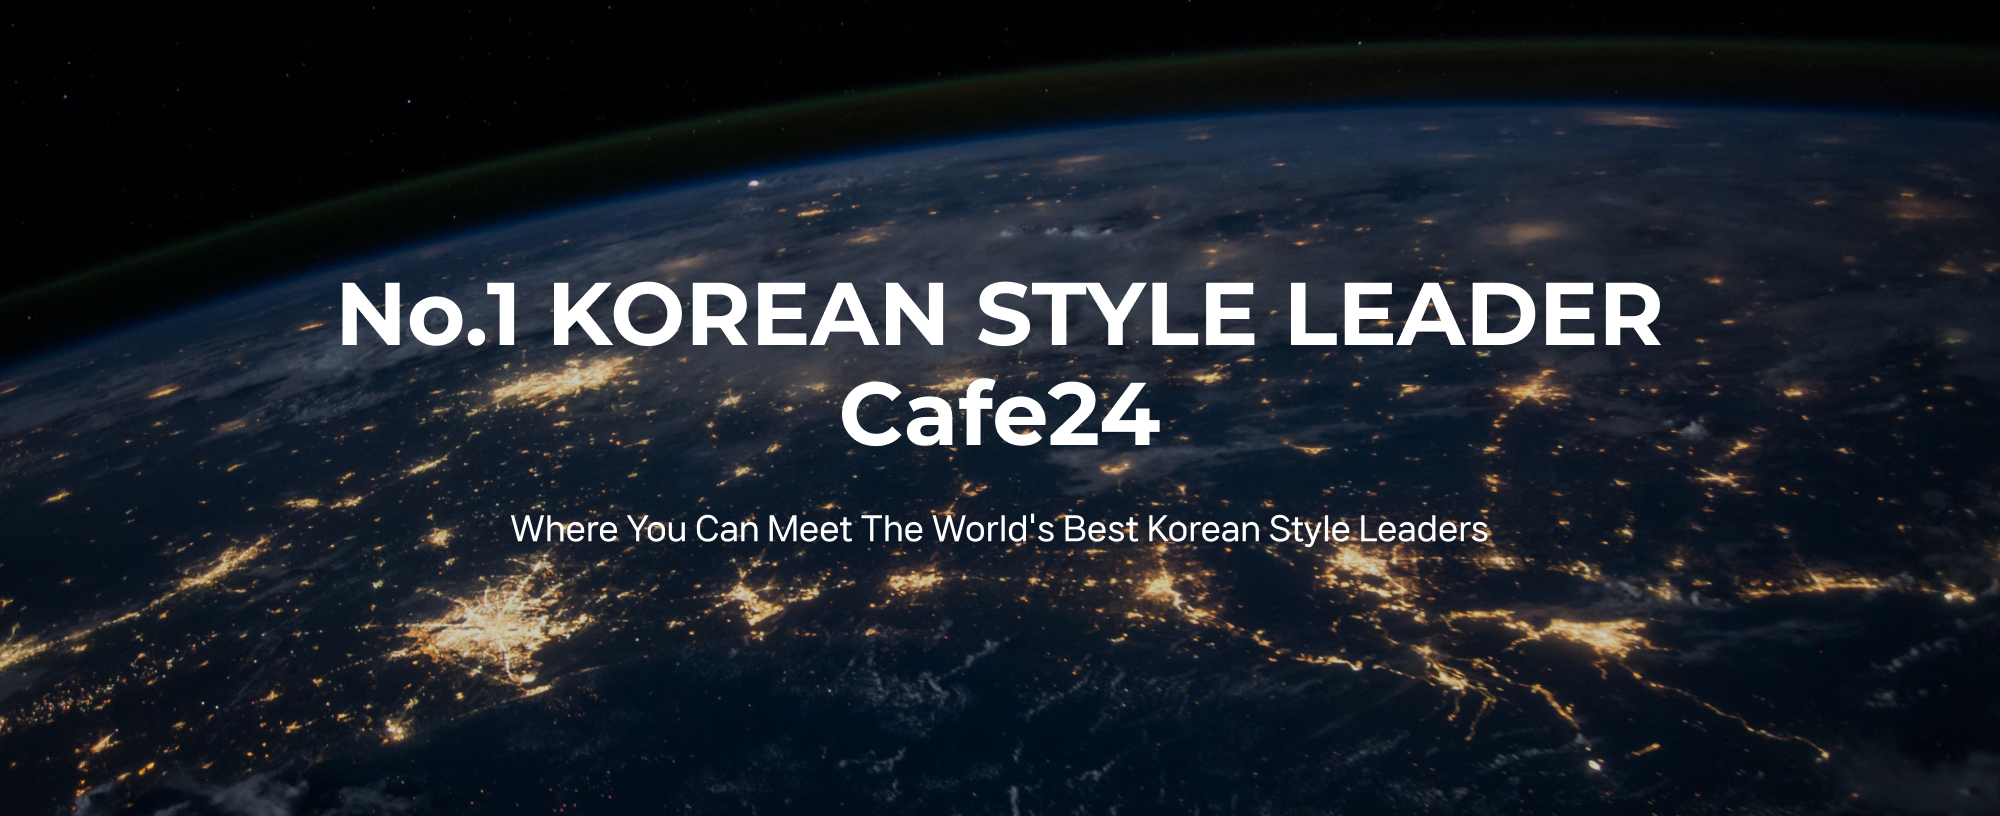 No.1 KOREAN STYLE LEADER Cafe24 Where You Can Meet The World's Best Korean Style Leaders